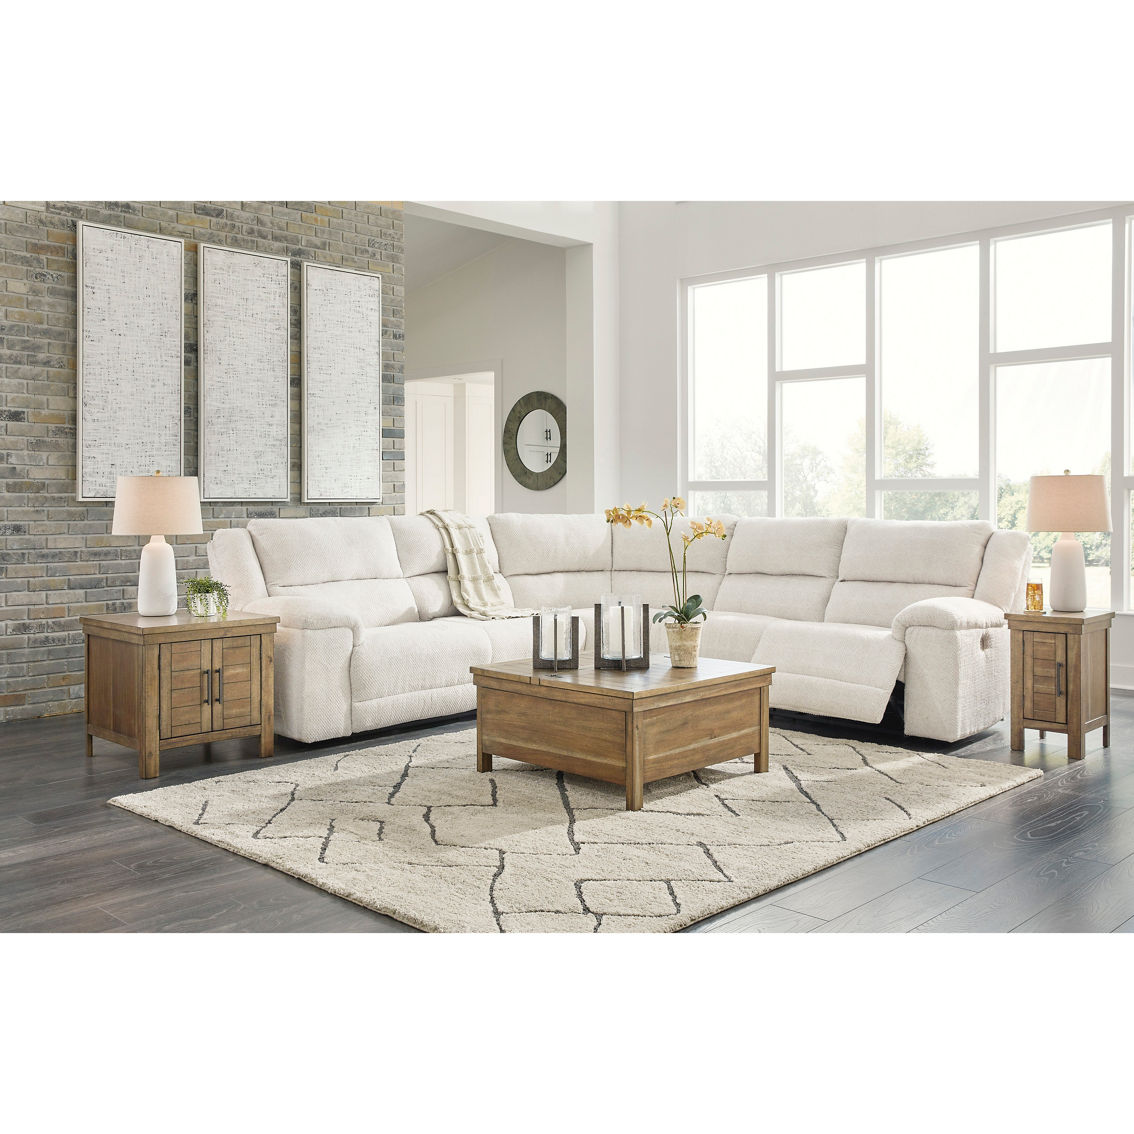 Signature Design by Ashley Keensburg 3pc. Power Reclining Sectional - Image 5 of 6